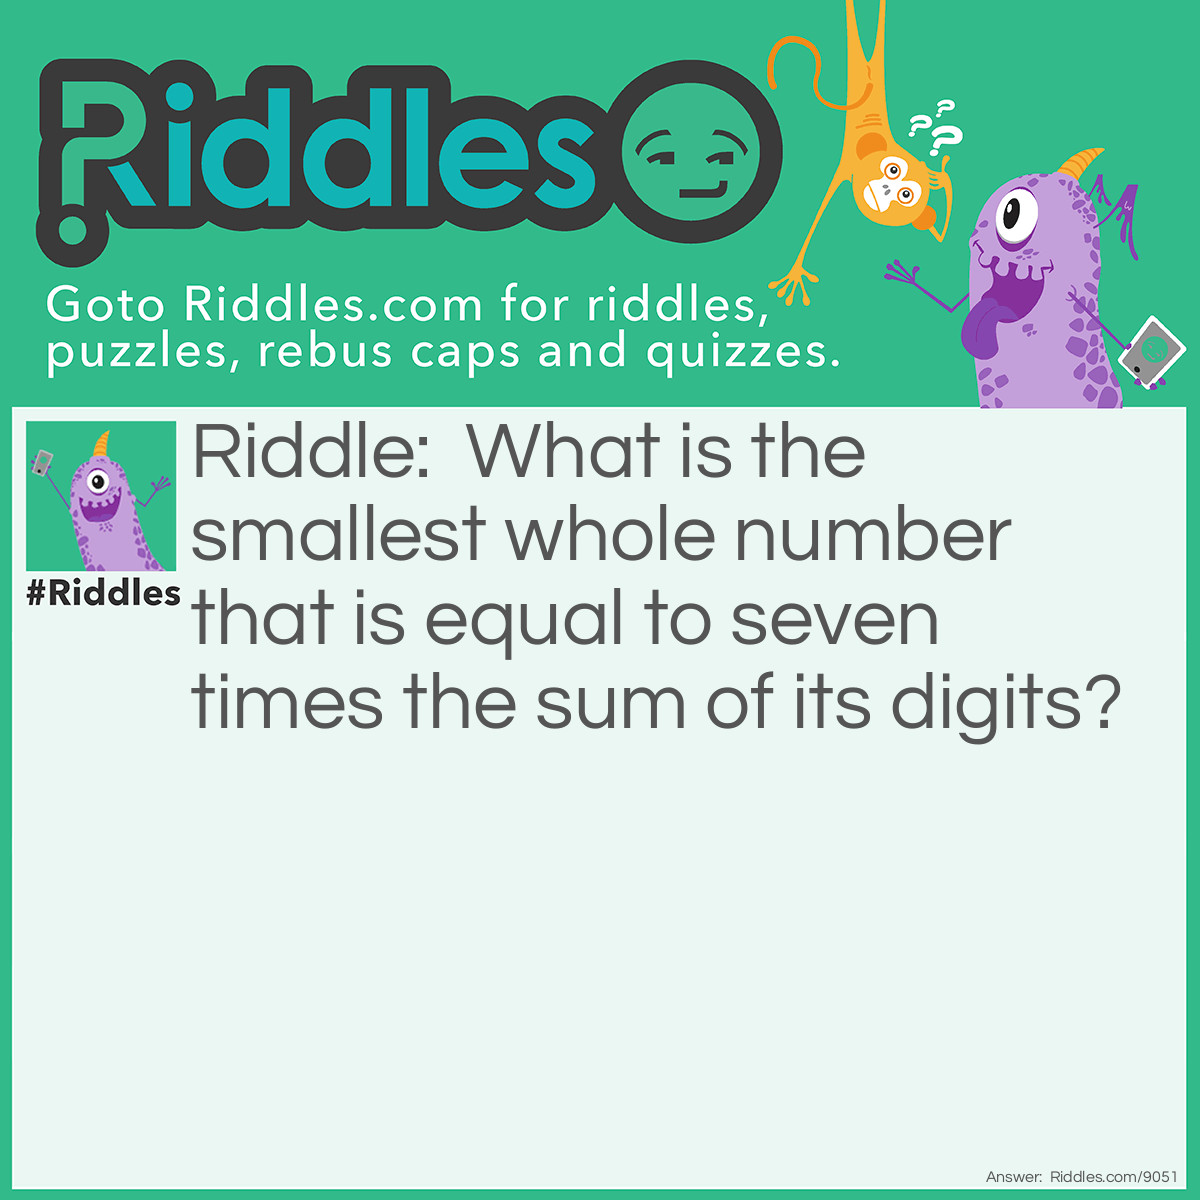 Riddle: What is the smallest whole number that is equal to seven times the sum of its digits? Answer: The answer to this math riddle is 21. You probably just guessed to answer this <a href="/math-riddles">math riddle</a>, which is fine, but you can also work it out algebraically. The two-digit number ab stands for 10a + b since the first digit represents 10s and the second represents units. If 10a + b = 7(a + b), then 10a + b = 7a + 7b, and so 3a = 6b, or, more simply, a = 2b. That is, the second digit must be twice the first. The smallest such number is 21.